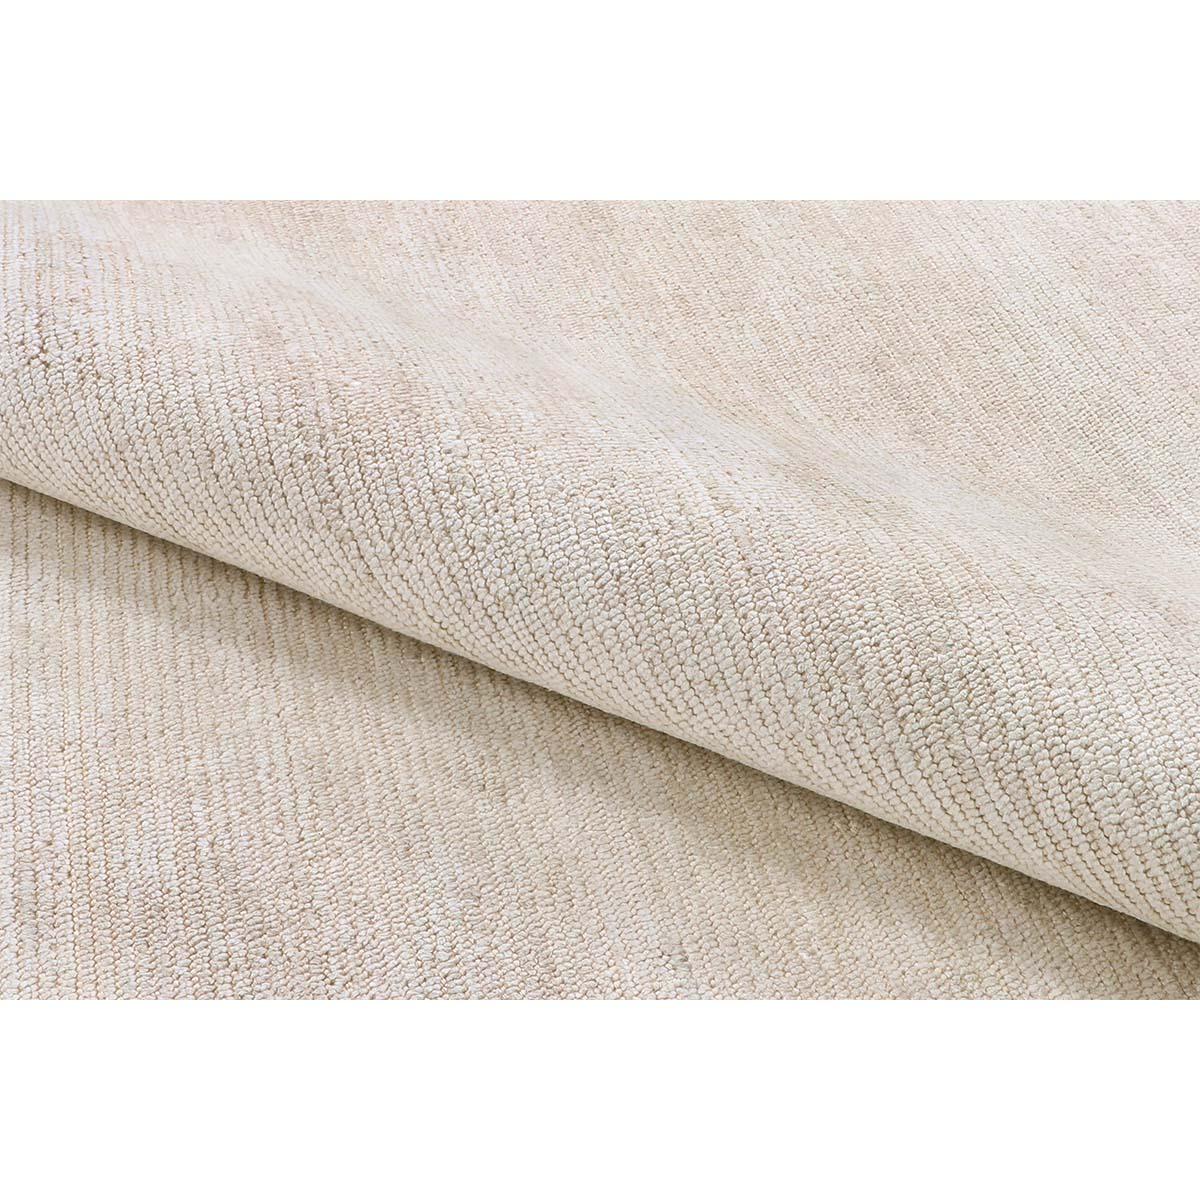 The lustrous viscose texture of this Handloomed Cream Rug yields a surface as soft to the hand as it is rich to the eye. The understated elegance of true tones and sturdy construction complete this picture of luxury and durability. Measures: 8' x